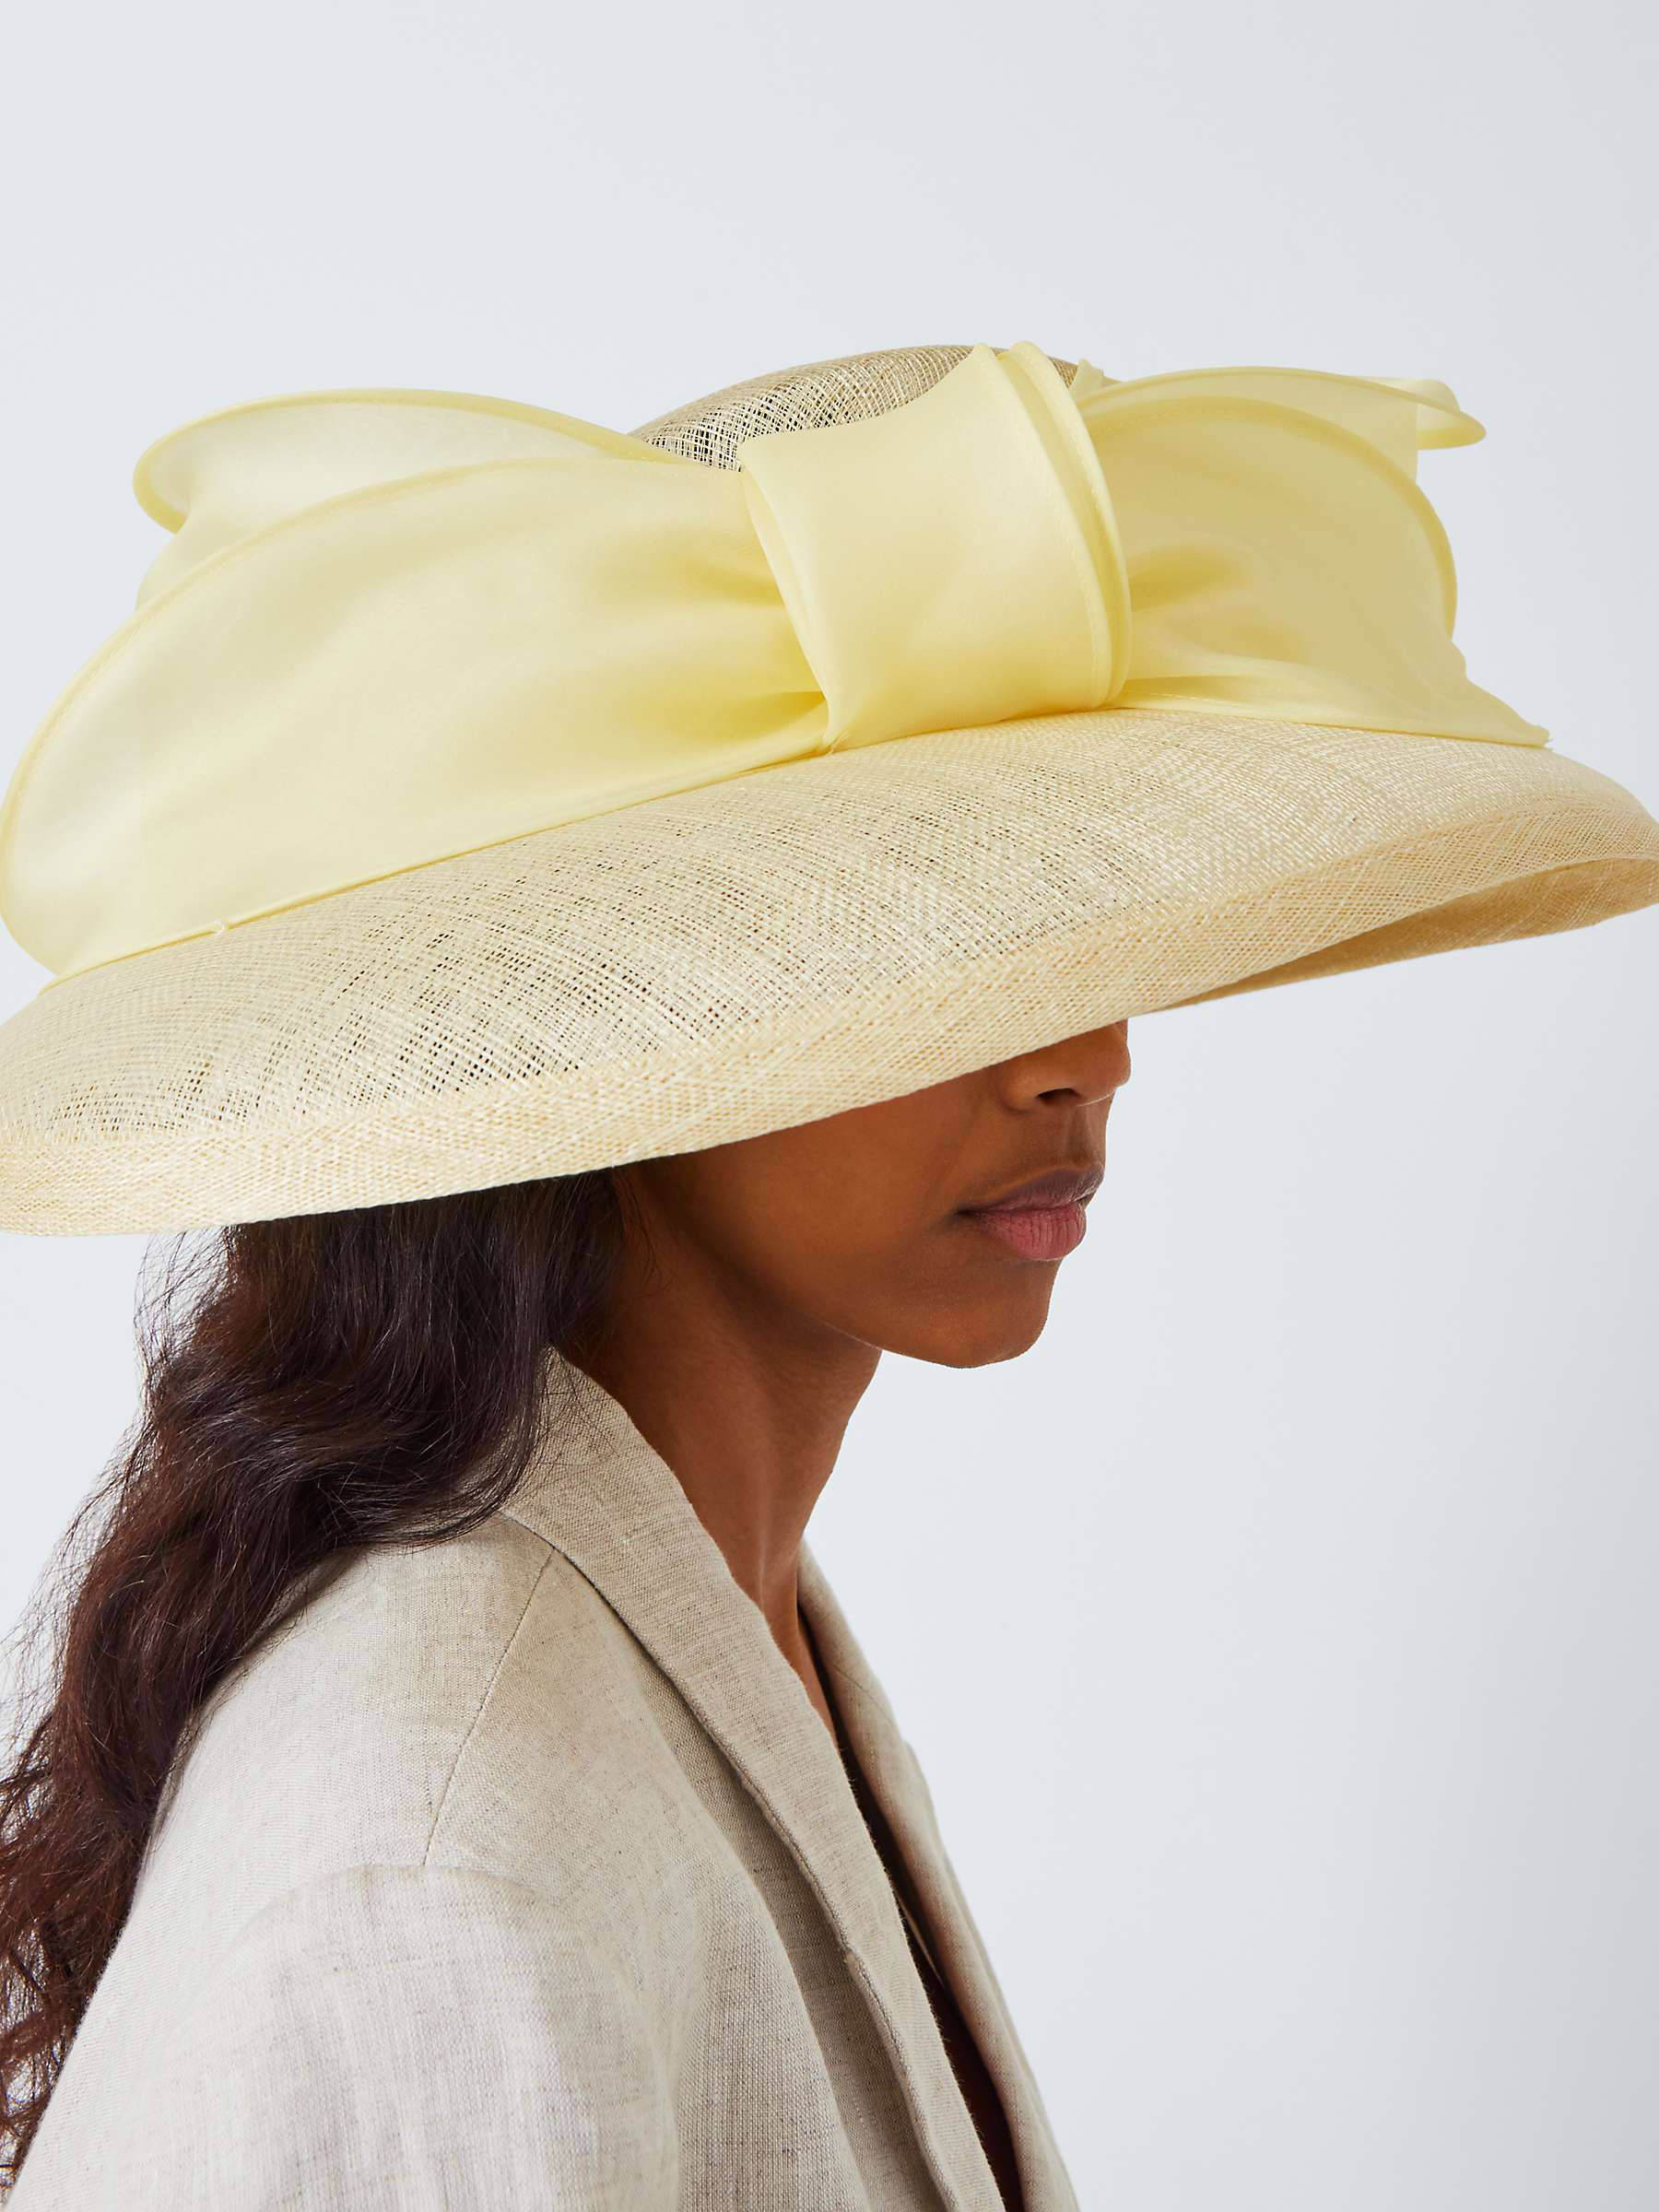 Buy Whiteley Made in England Rhiannon Satin Bow Occasion Hat, Yellow Online at johnlewis.com